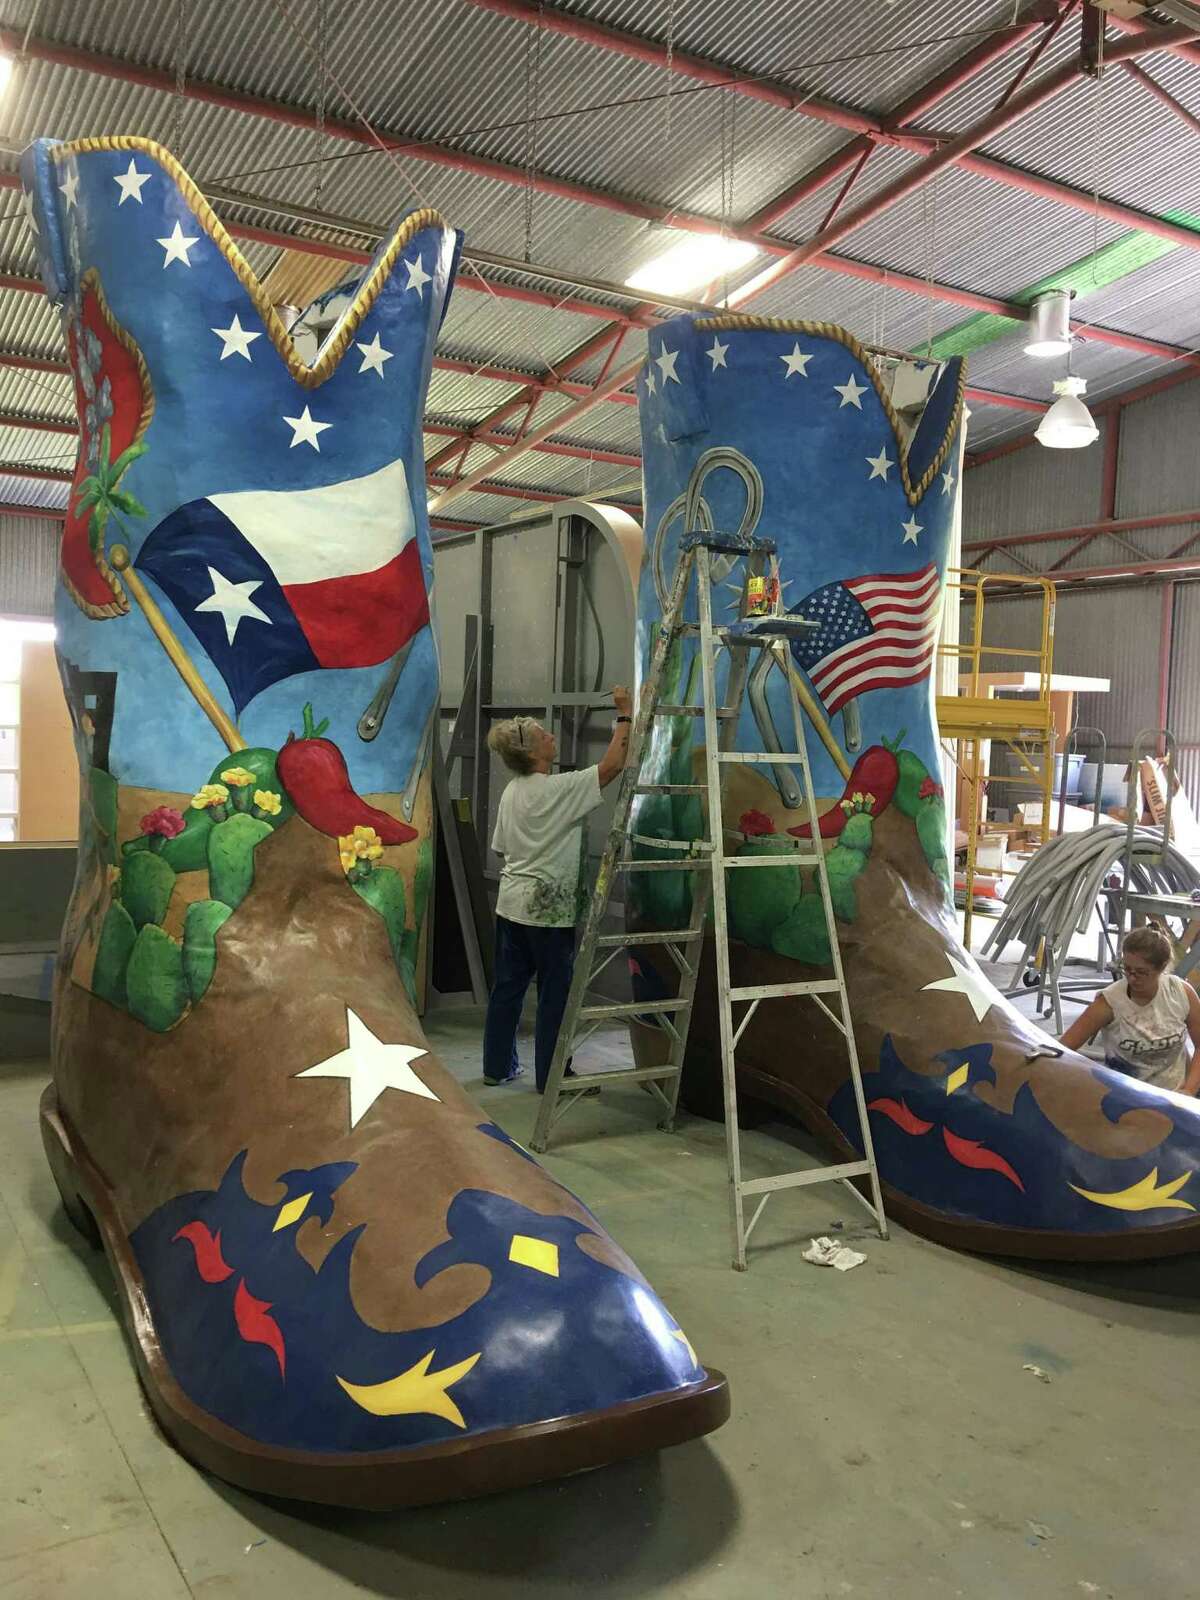 Boerne-based SRO Associates, which provides creative and construction services, is the creator of the size 96 Lucchese boots that Big Texas will be sporting at this year's state fair. Artist Erin Andreas works on the boots.